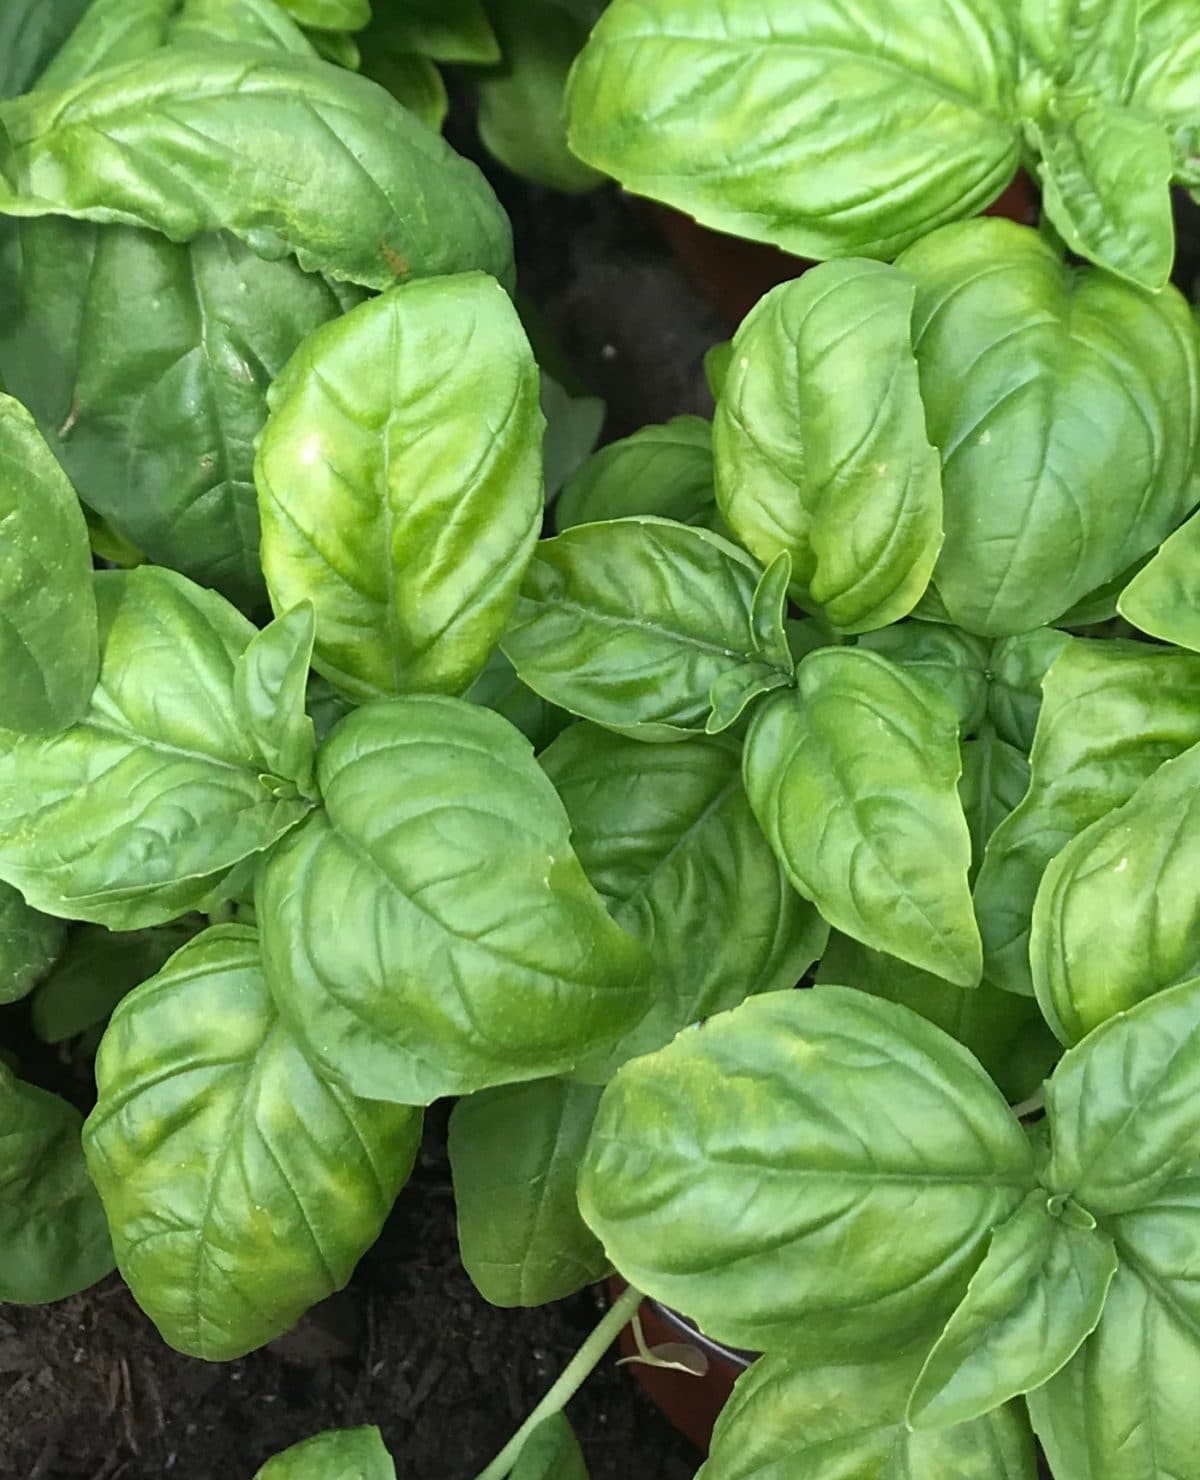 Basil is a super-easy herb to grow in your garden!